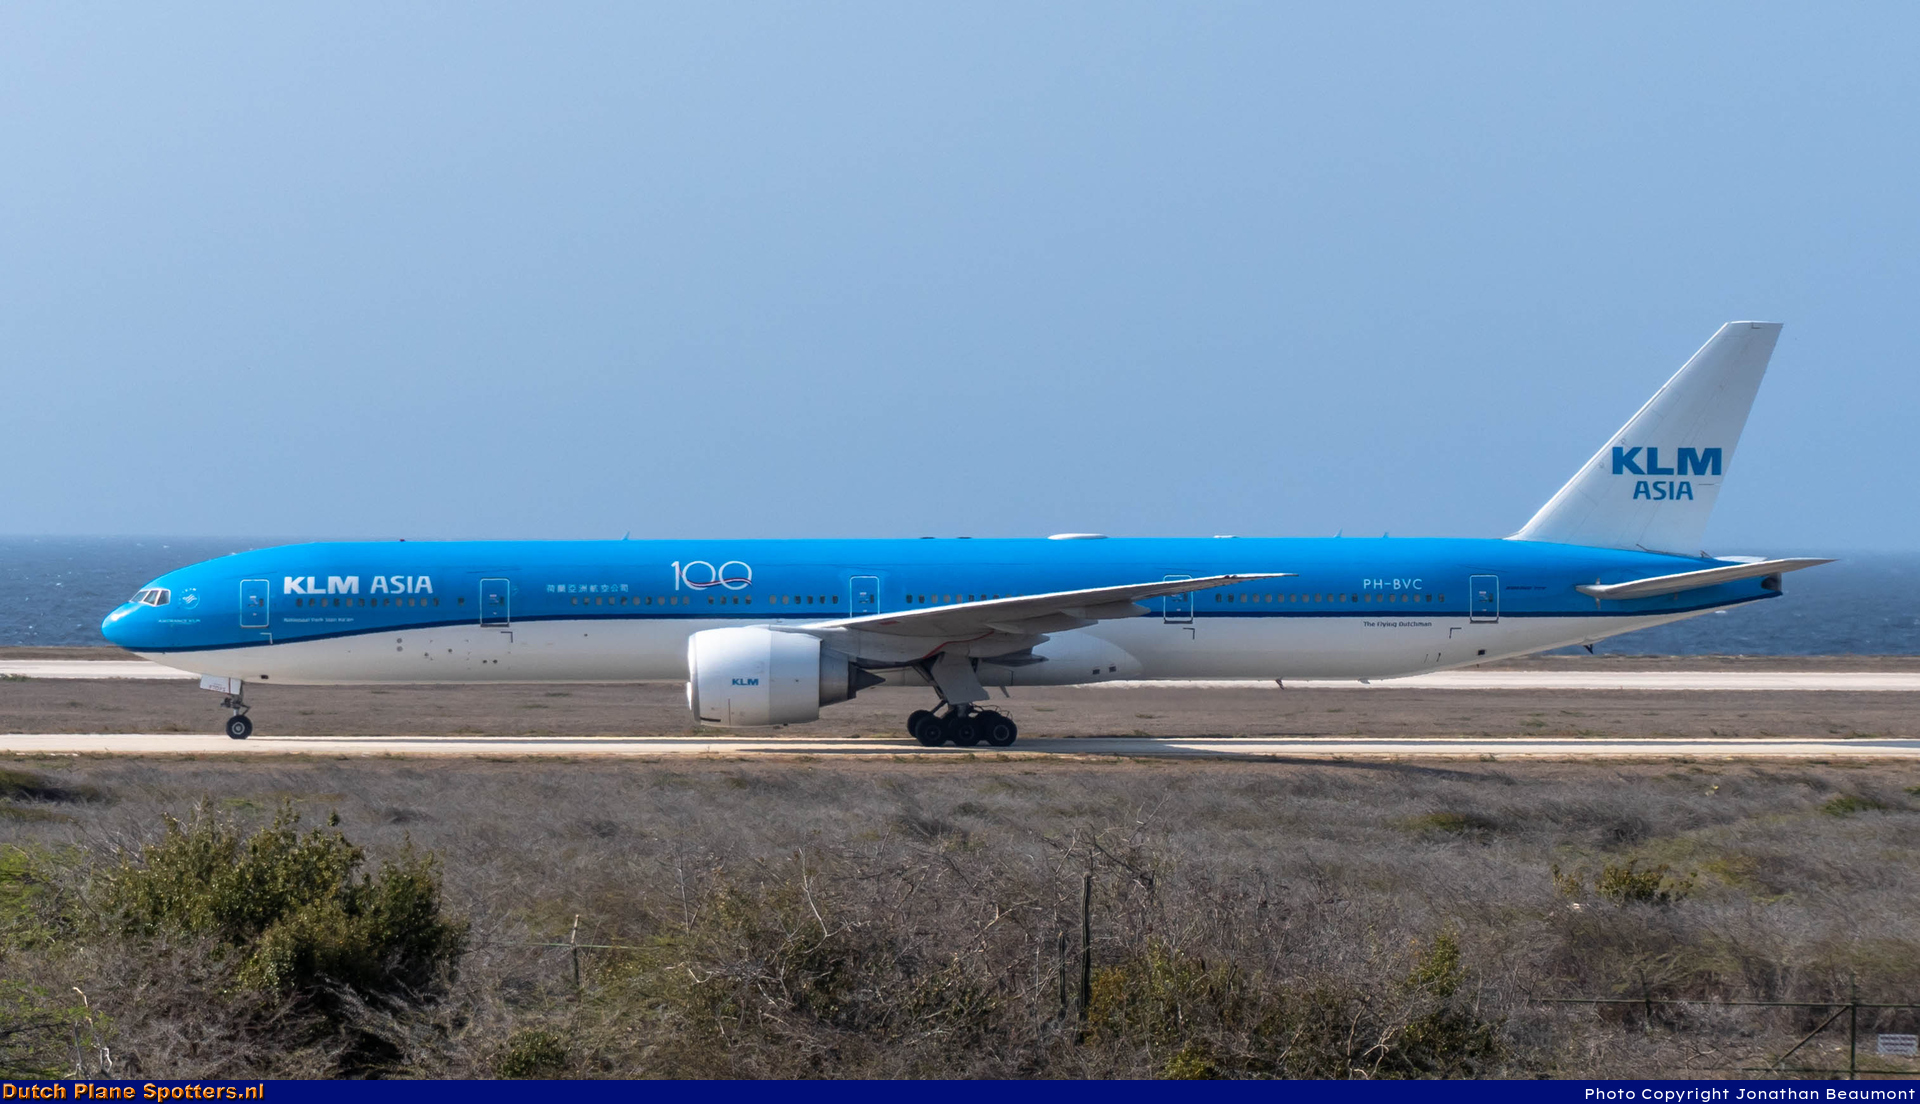 PH-BVC Boeing 777-300 KLM Asia by Jonathan Beaumont